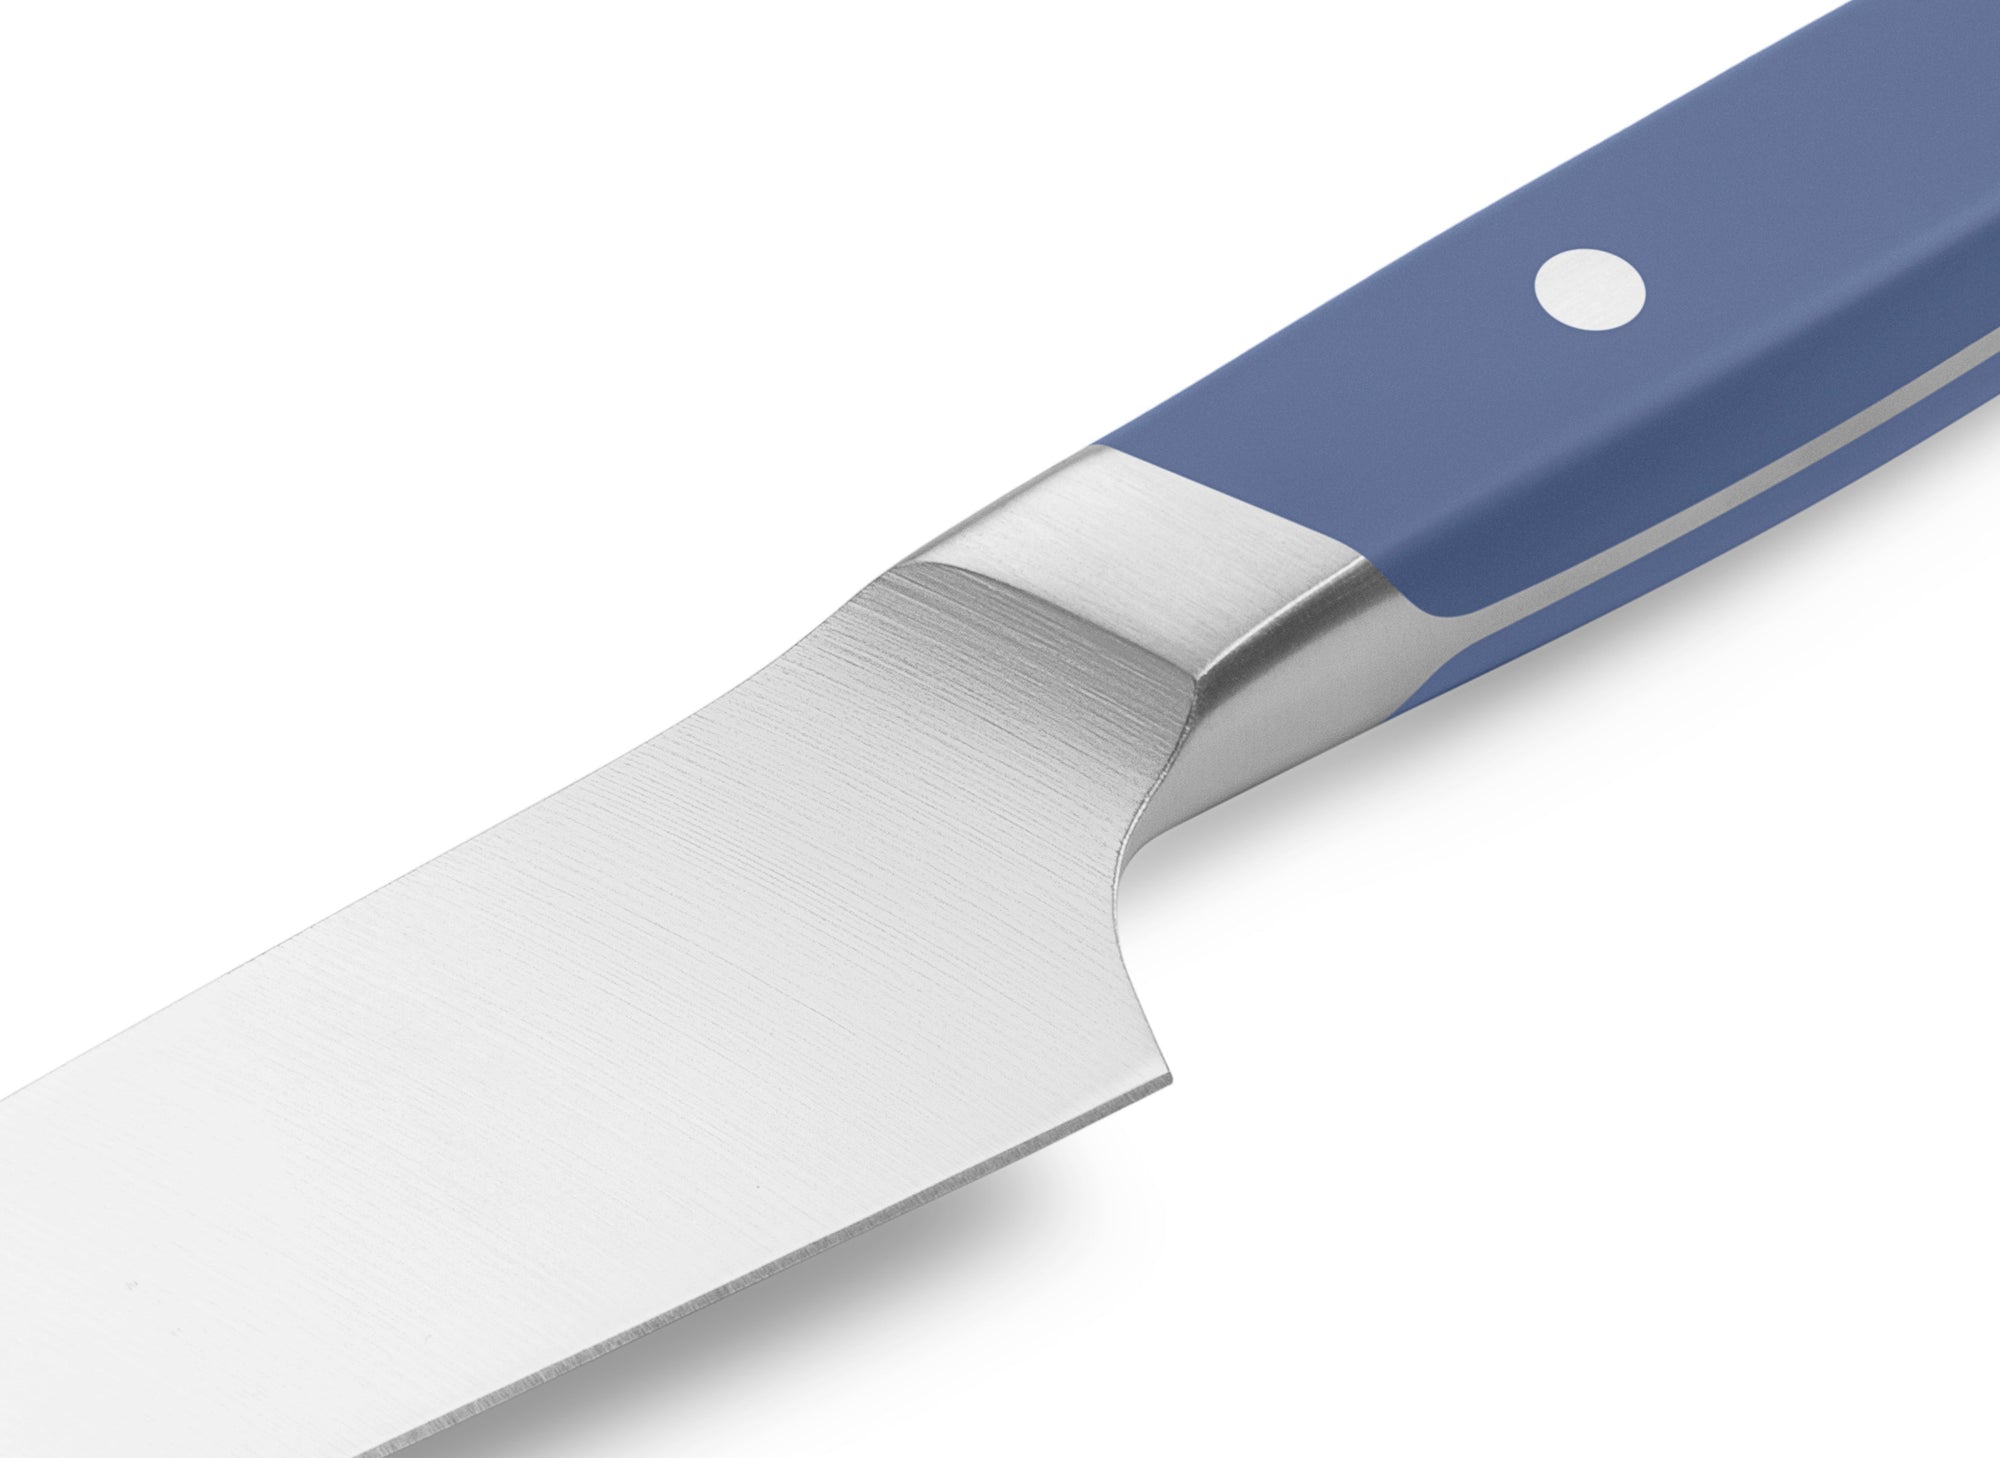 The Misen Utility Knife in blue features a unique sloped bolster.